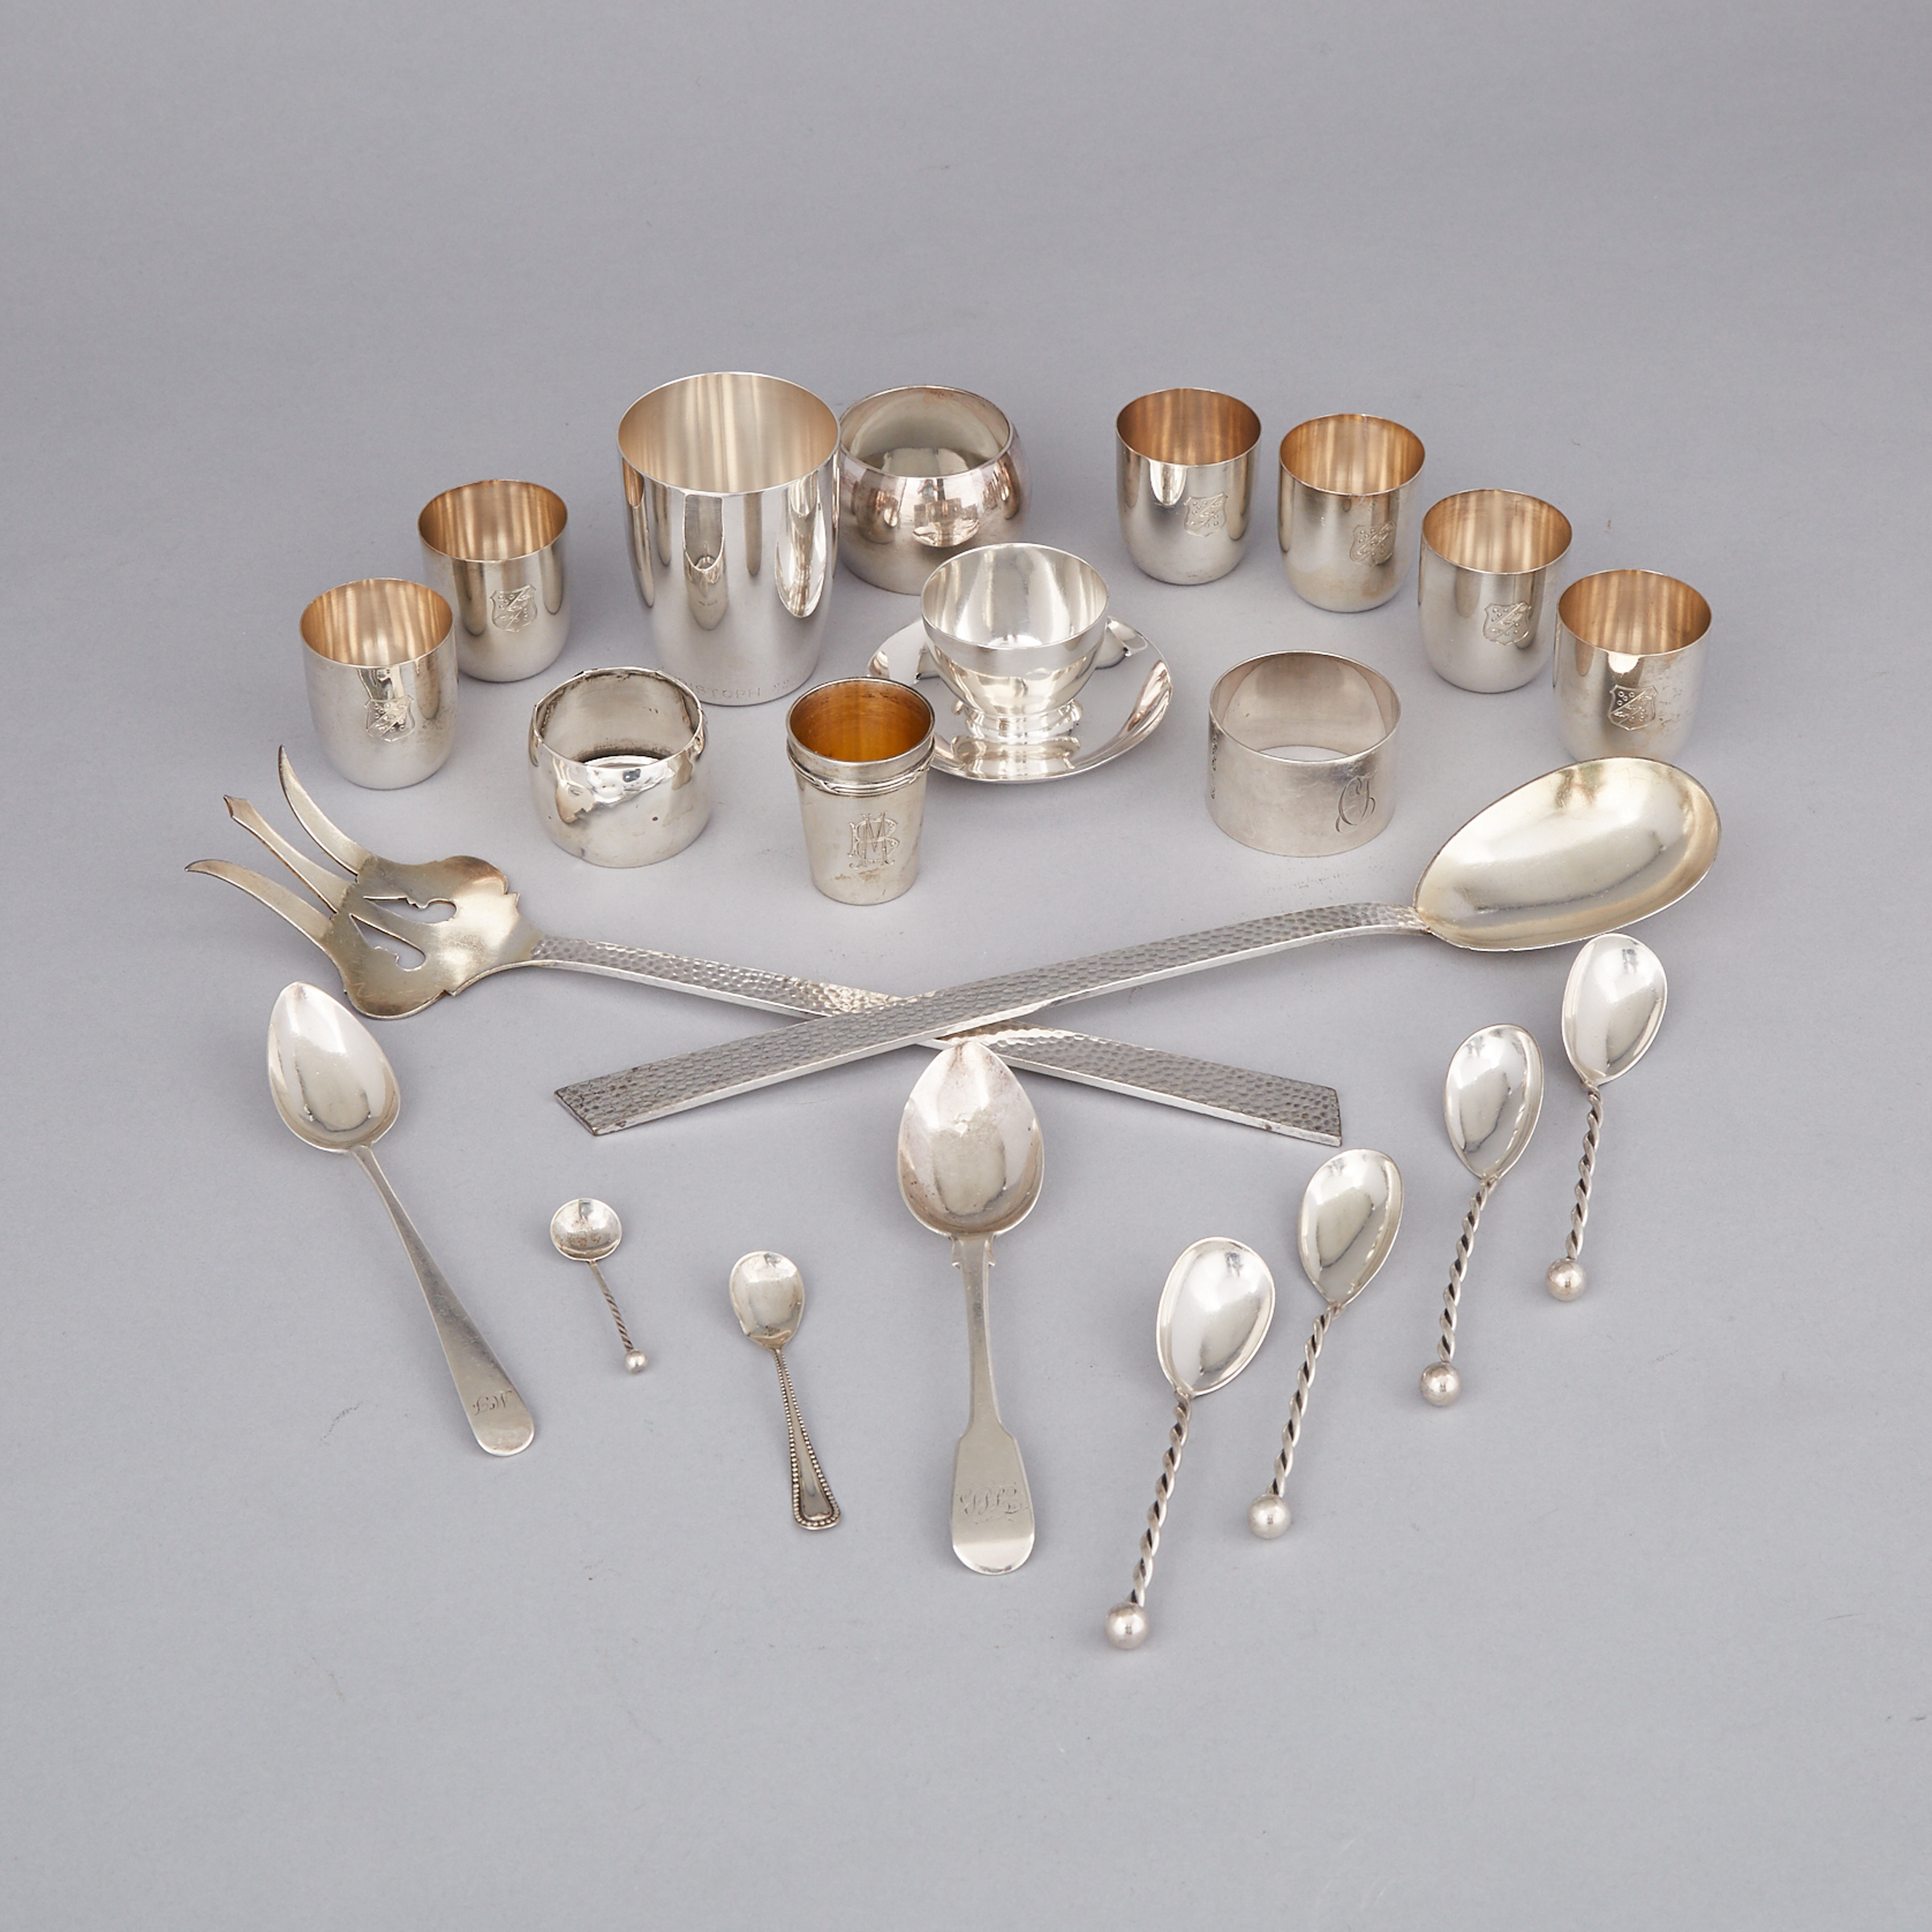 Group of Mostly German Silver, late 19th/early 20th century